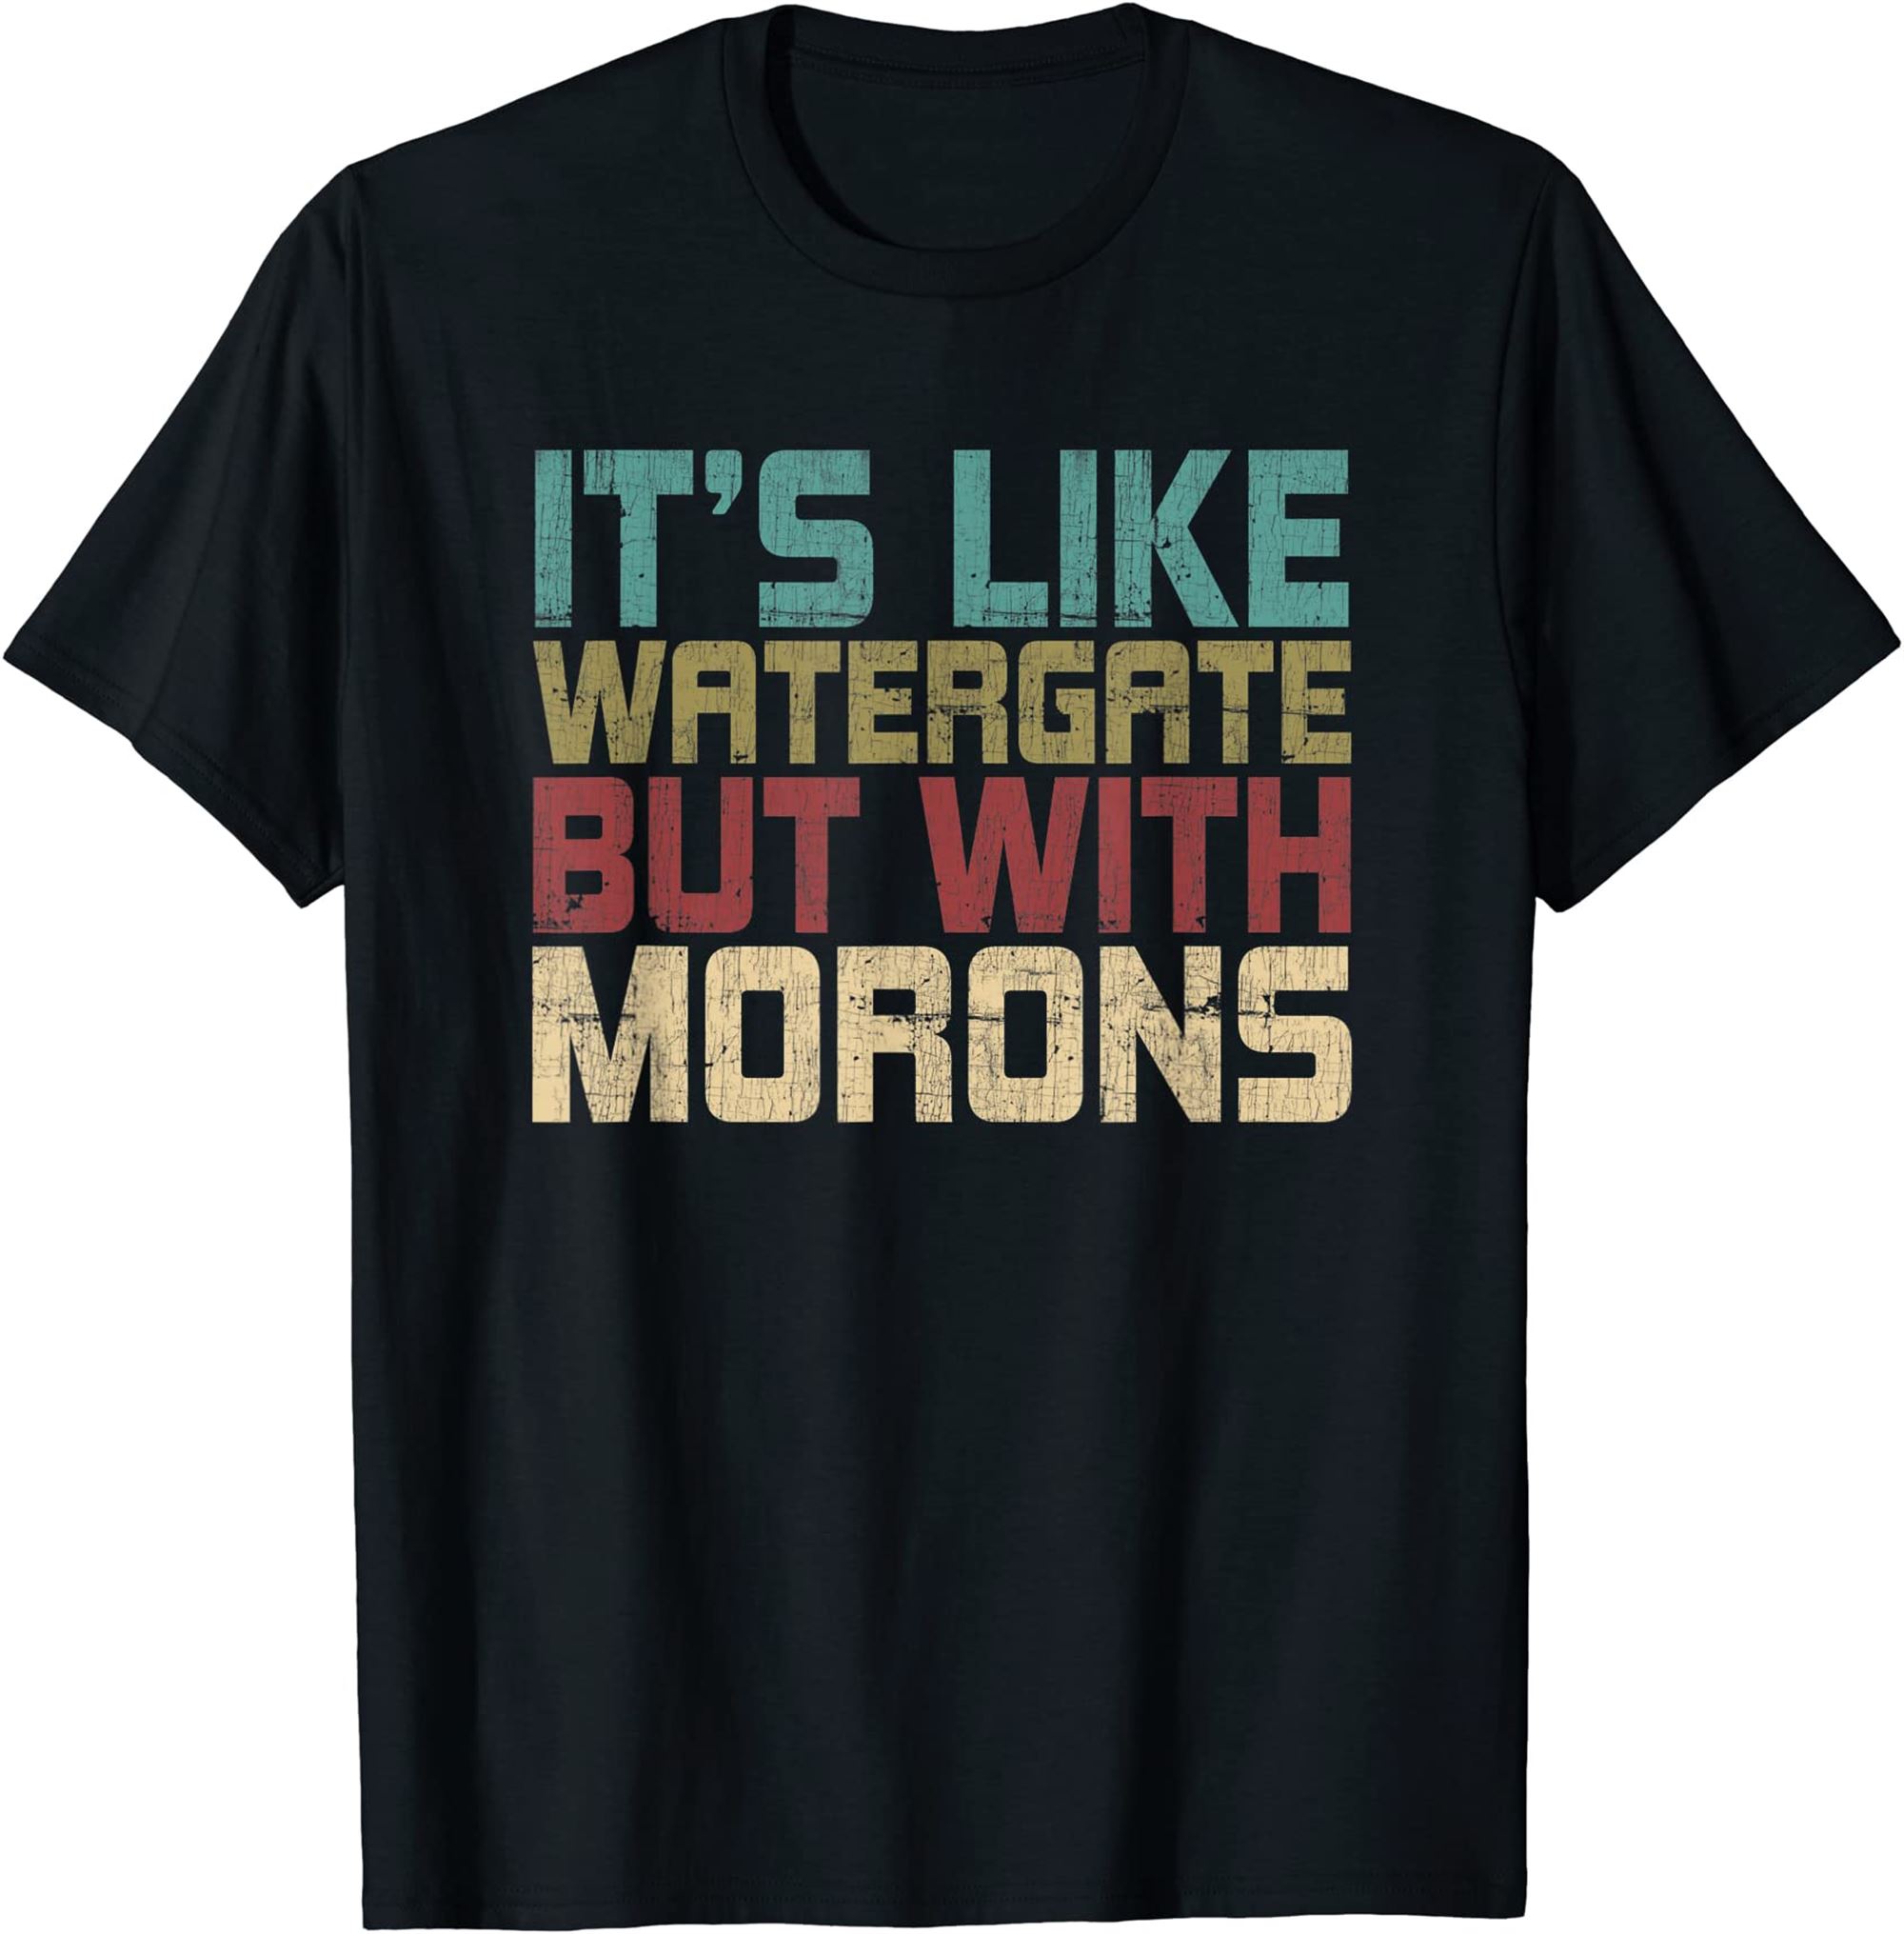 Its Like Watergate But With Morons Funny Impeach T-shirt Size Up To 5xl